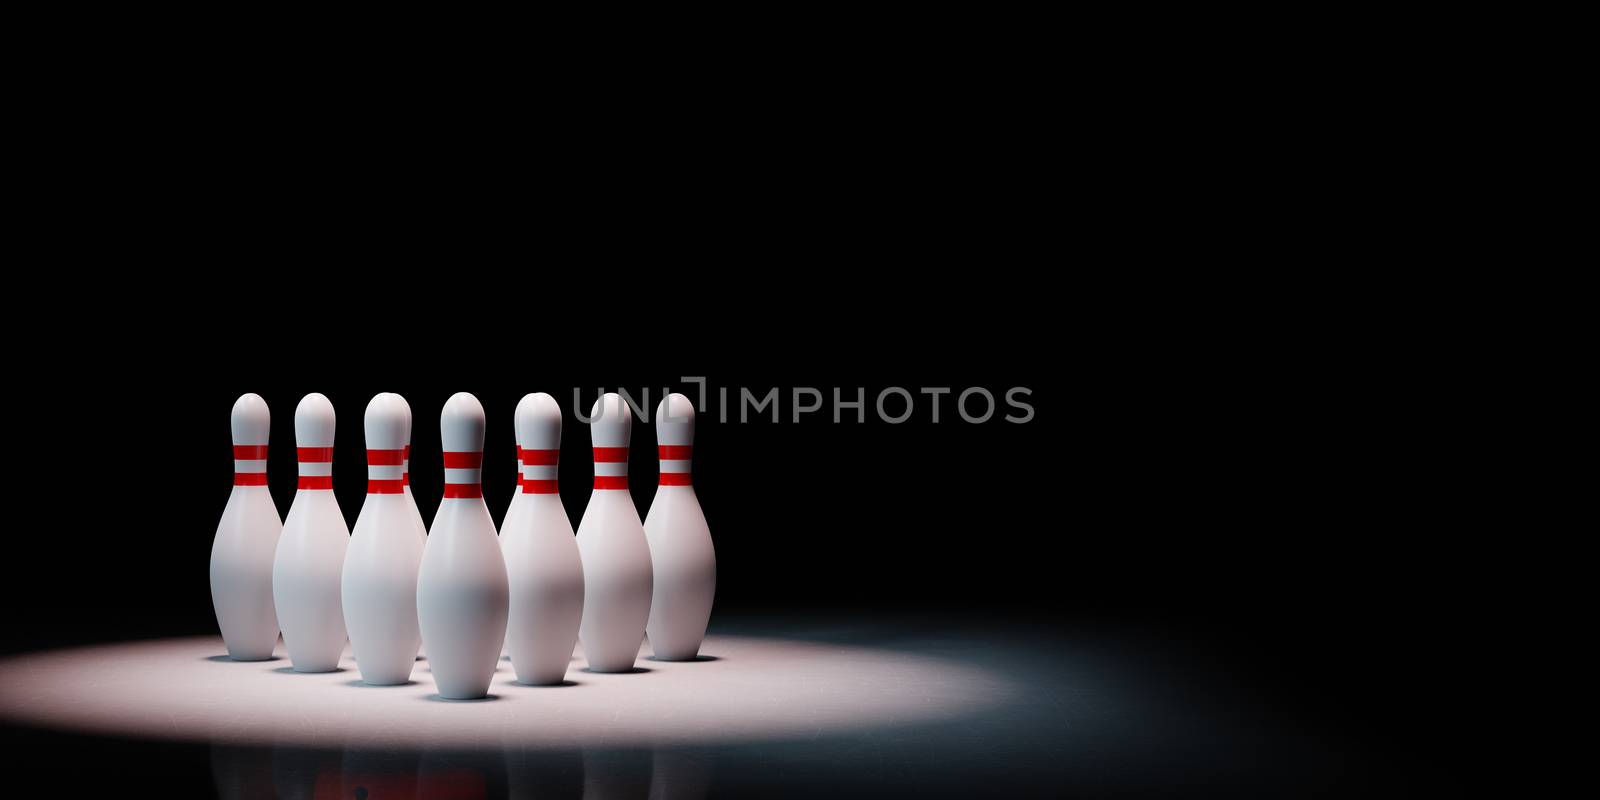 Red and White Bowling Skittles Spotlighted on Black Background with Copy Space 3D Illustration